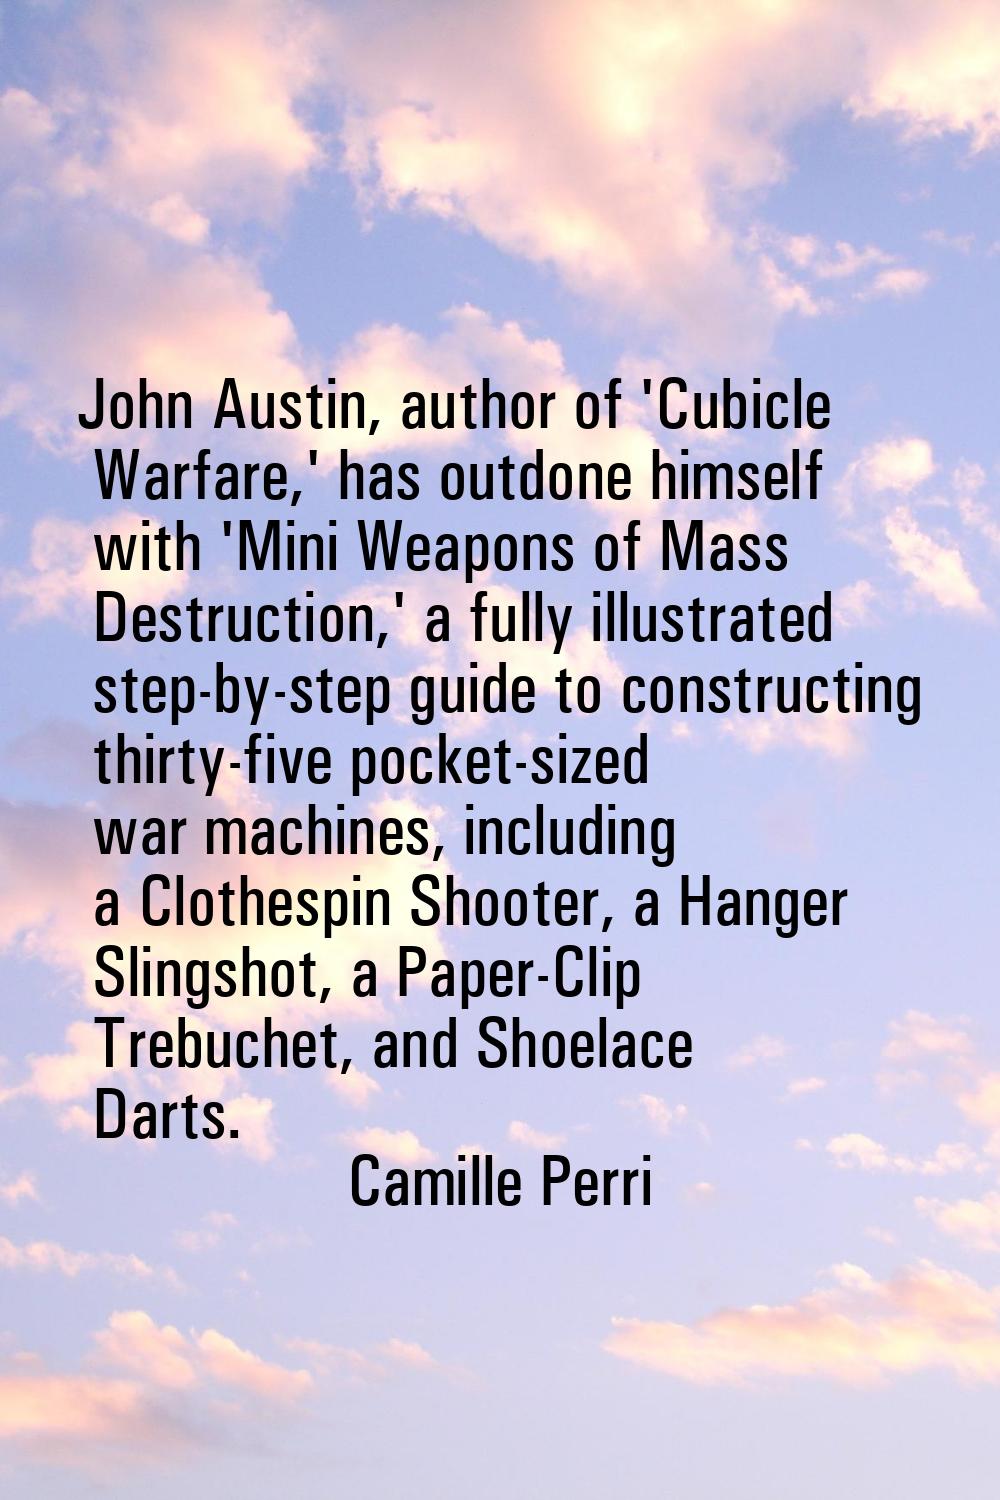 John Austin, author of 'Cubicle Warfare,' has outdone himself with 'Mini Weapons of Mass Destructio